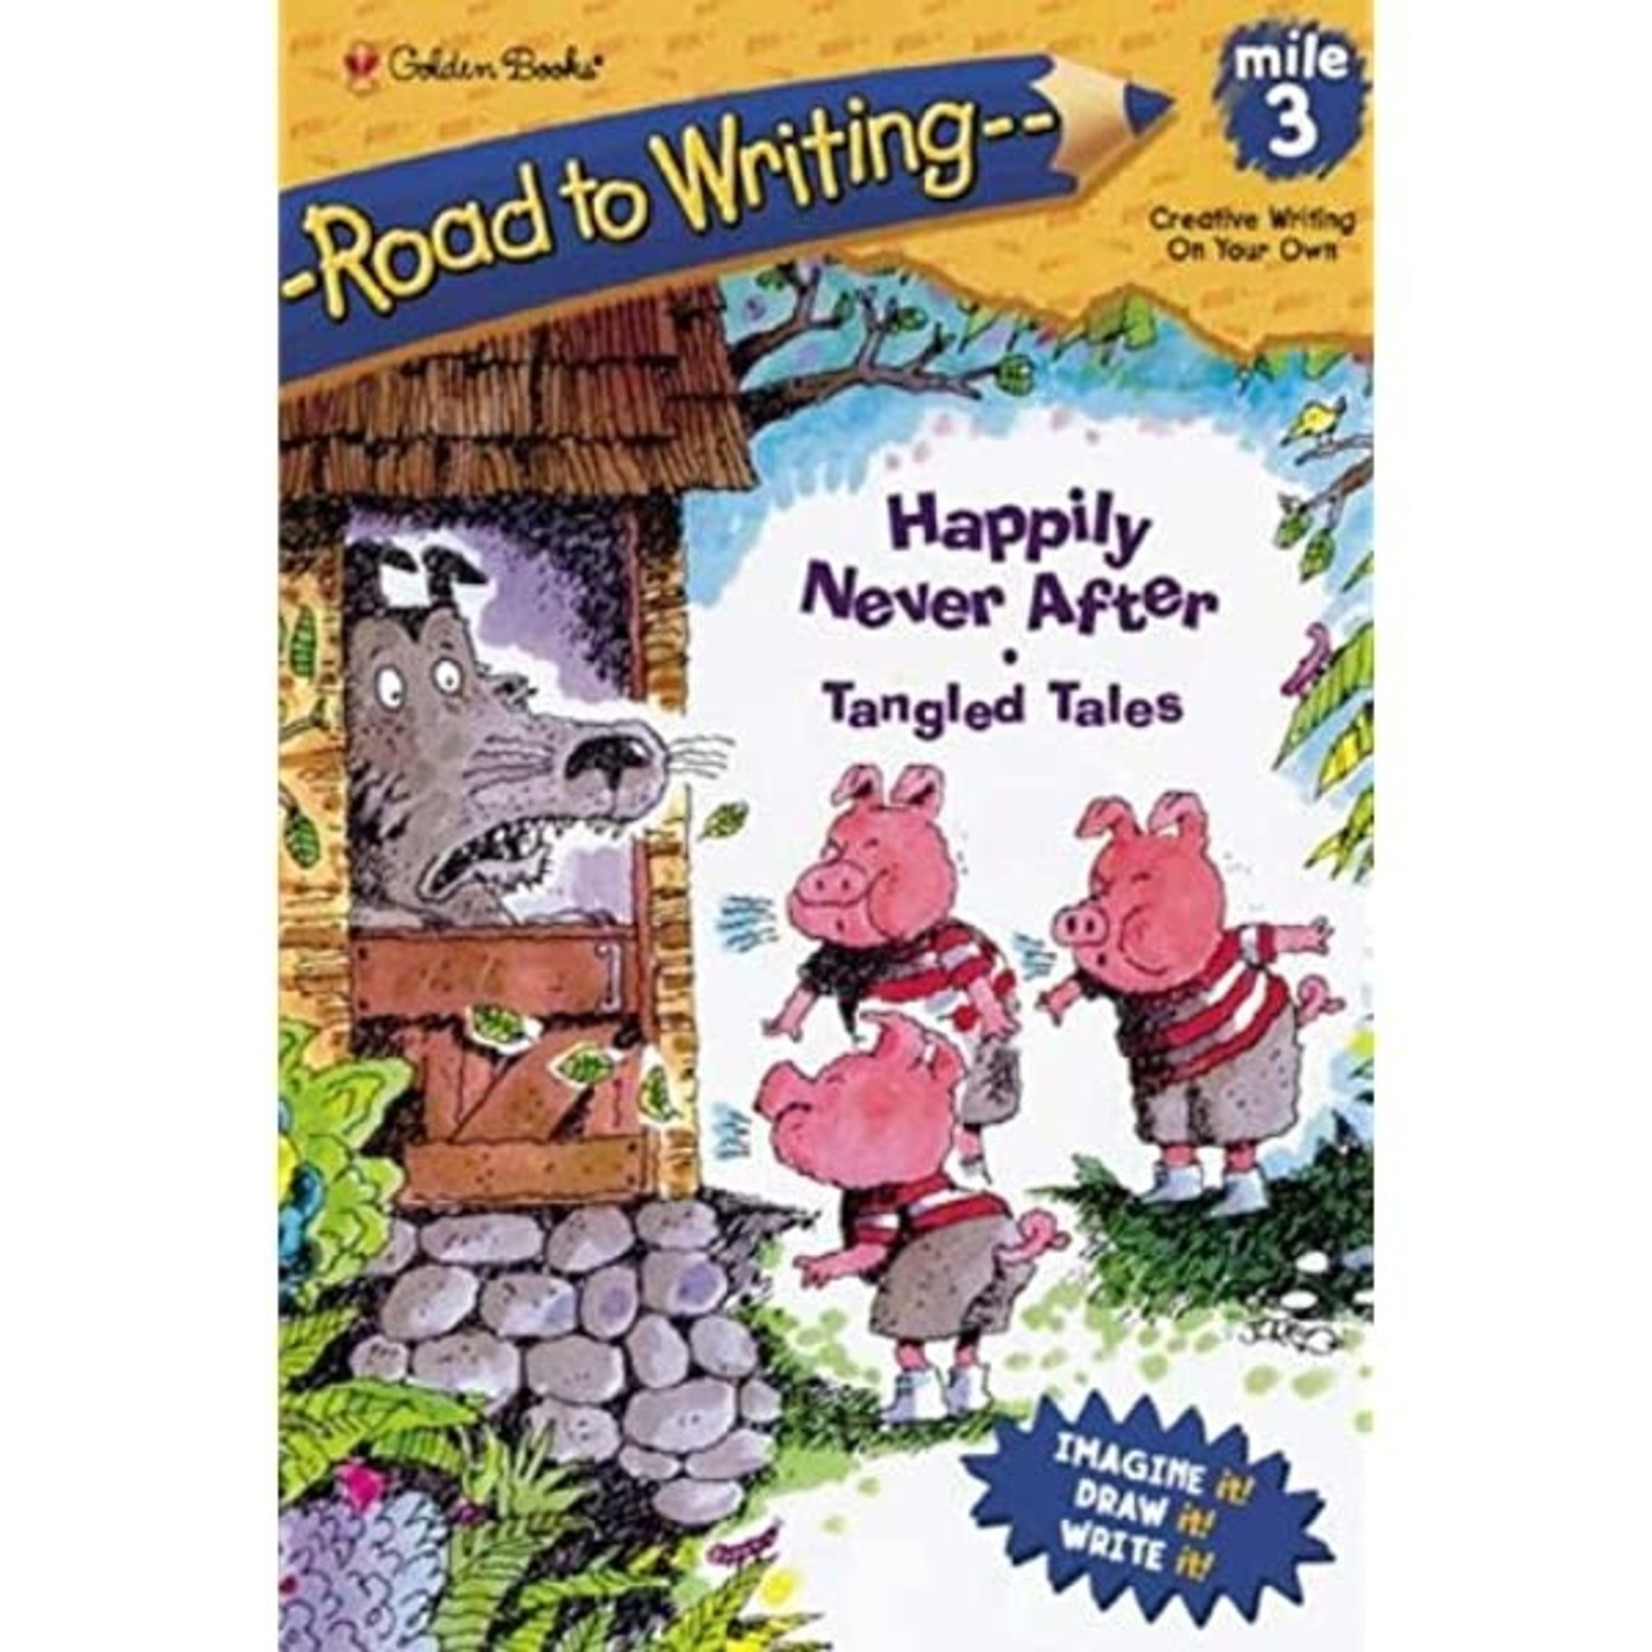 Happily Never After Tangled Tales Writing Book - Road to Reading 3